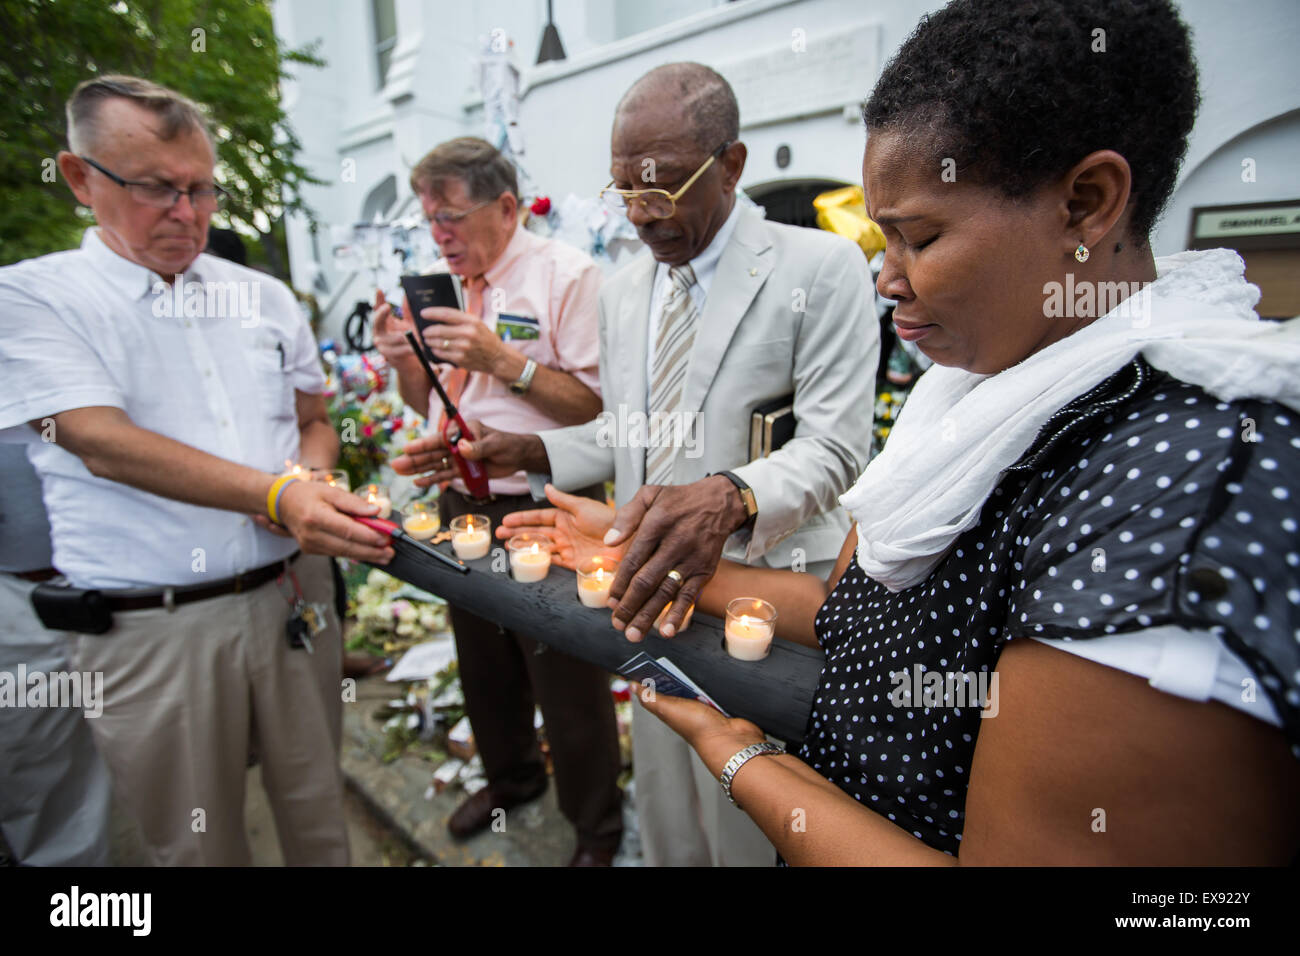 Memorial service in front of Emanuel AME Church in Charleston, S.C. Stock Photo